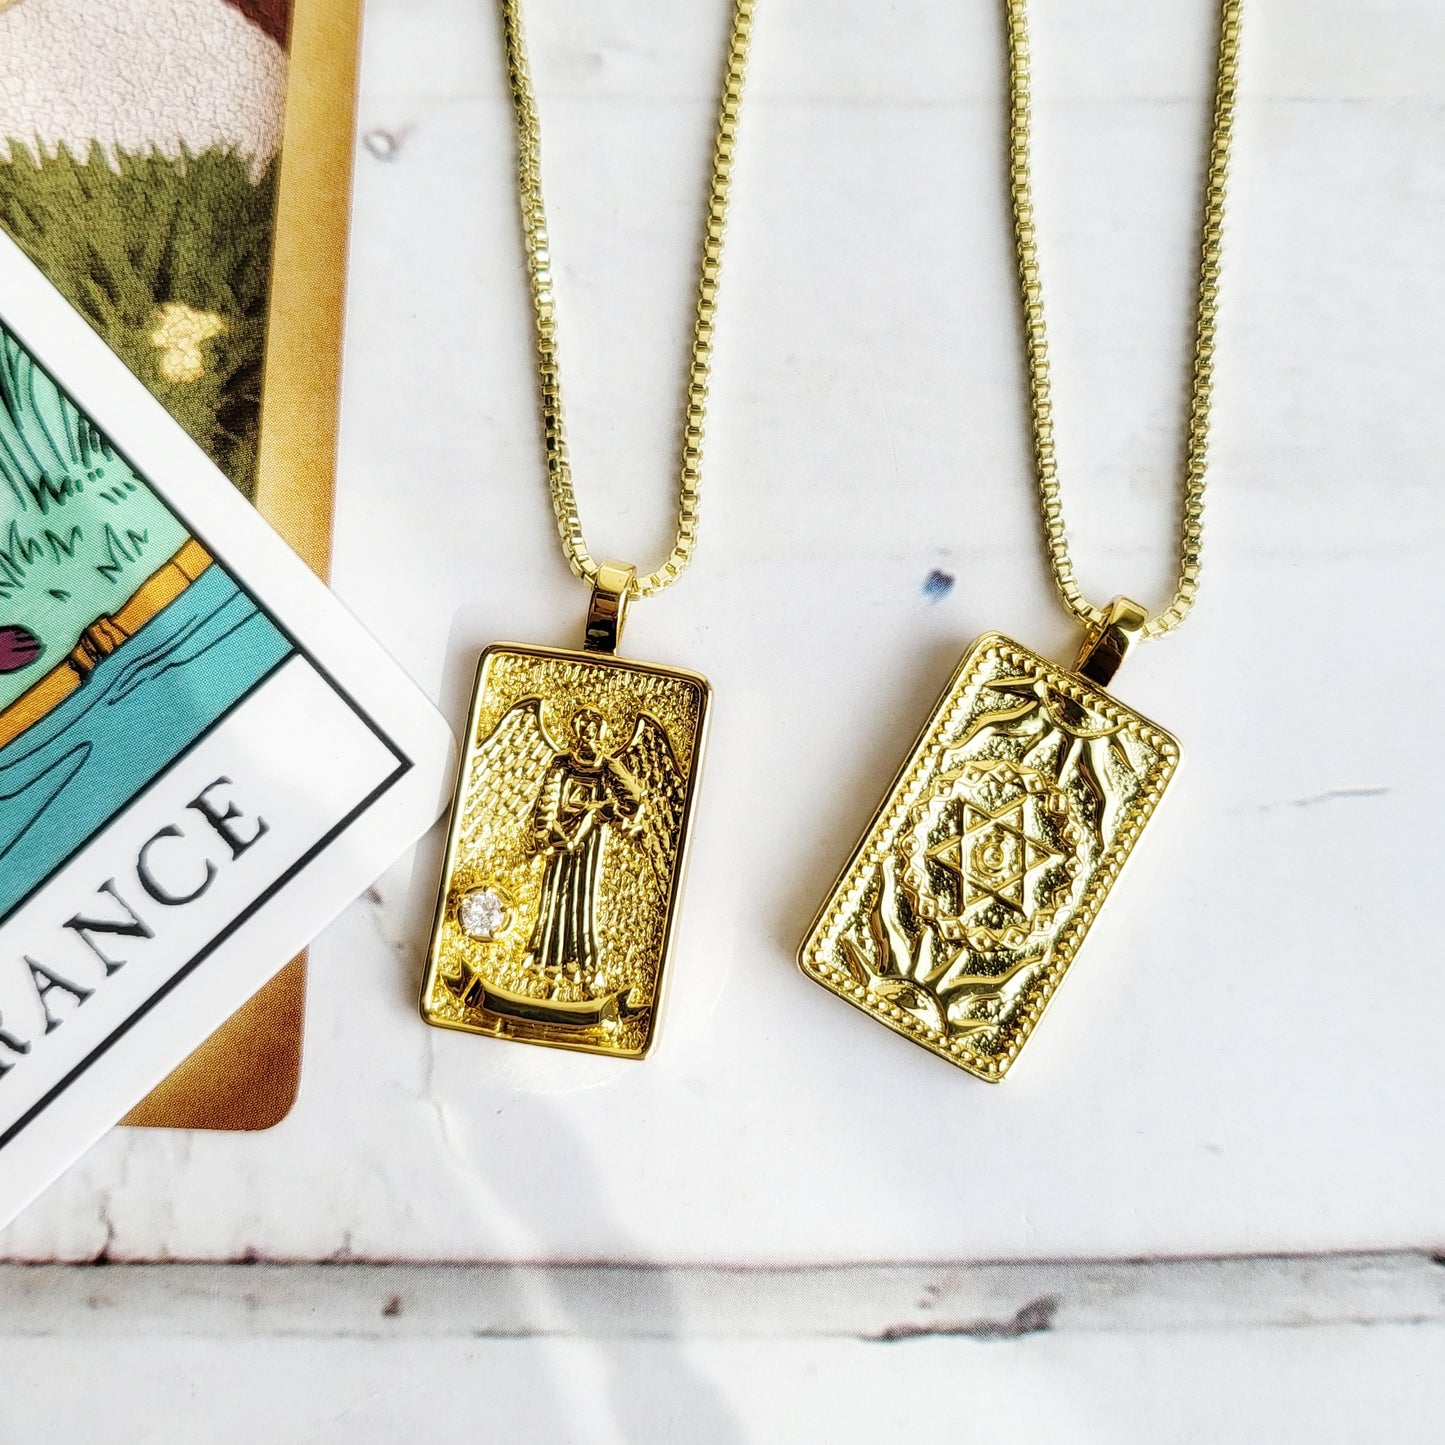 TEMPERANCE Tarot Card Necklace | 14K Gold Box Chain Pendant Necklace | Delicate, Minimalist Intention Celestial Necklace | Astrology Jewelry